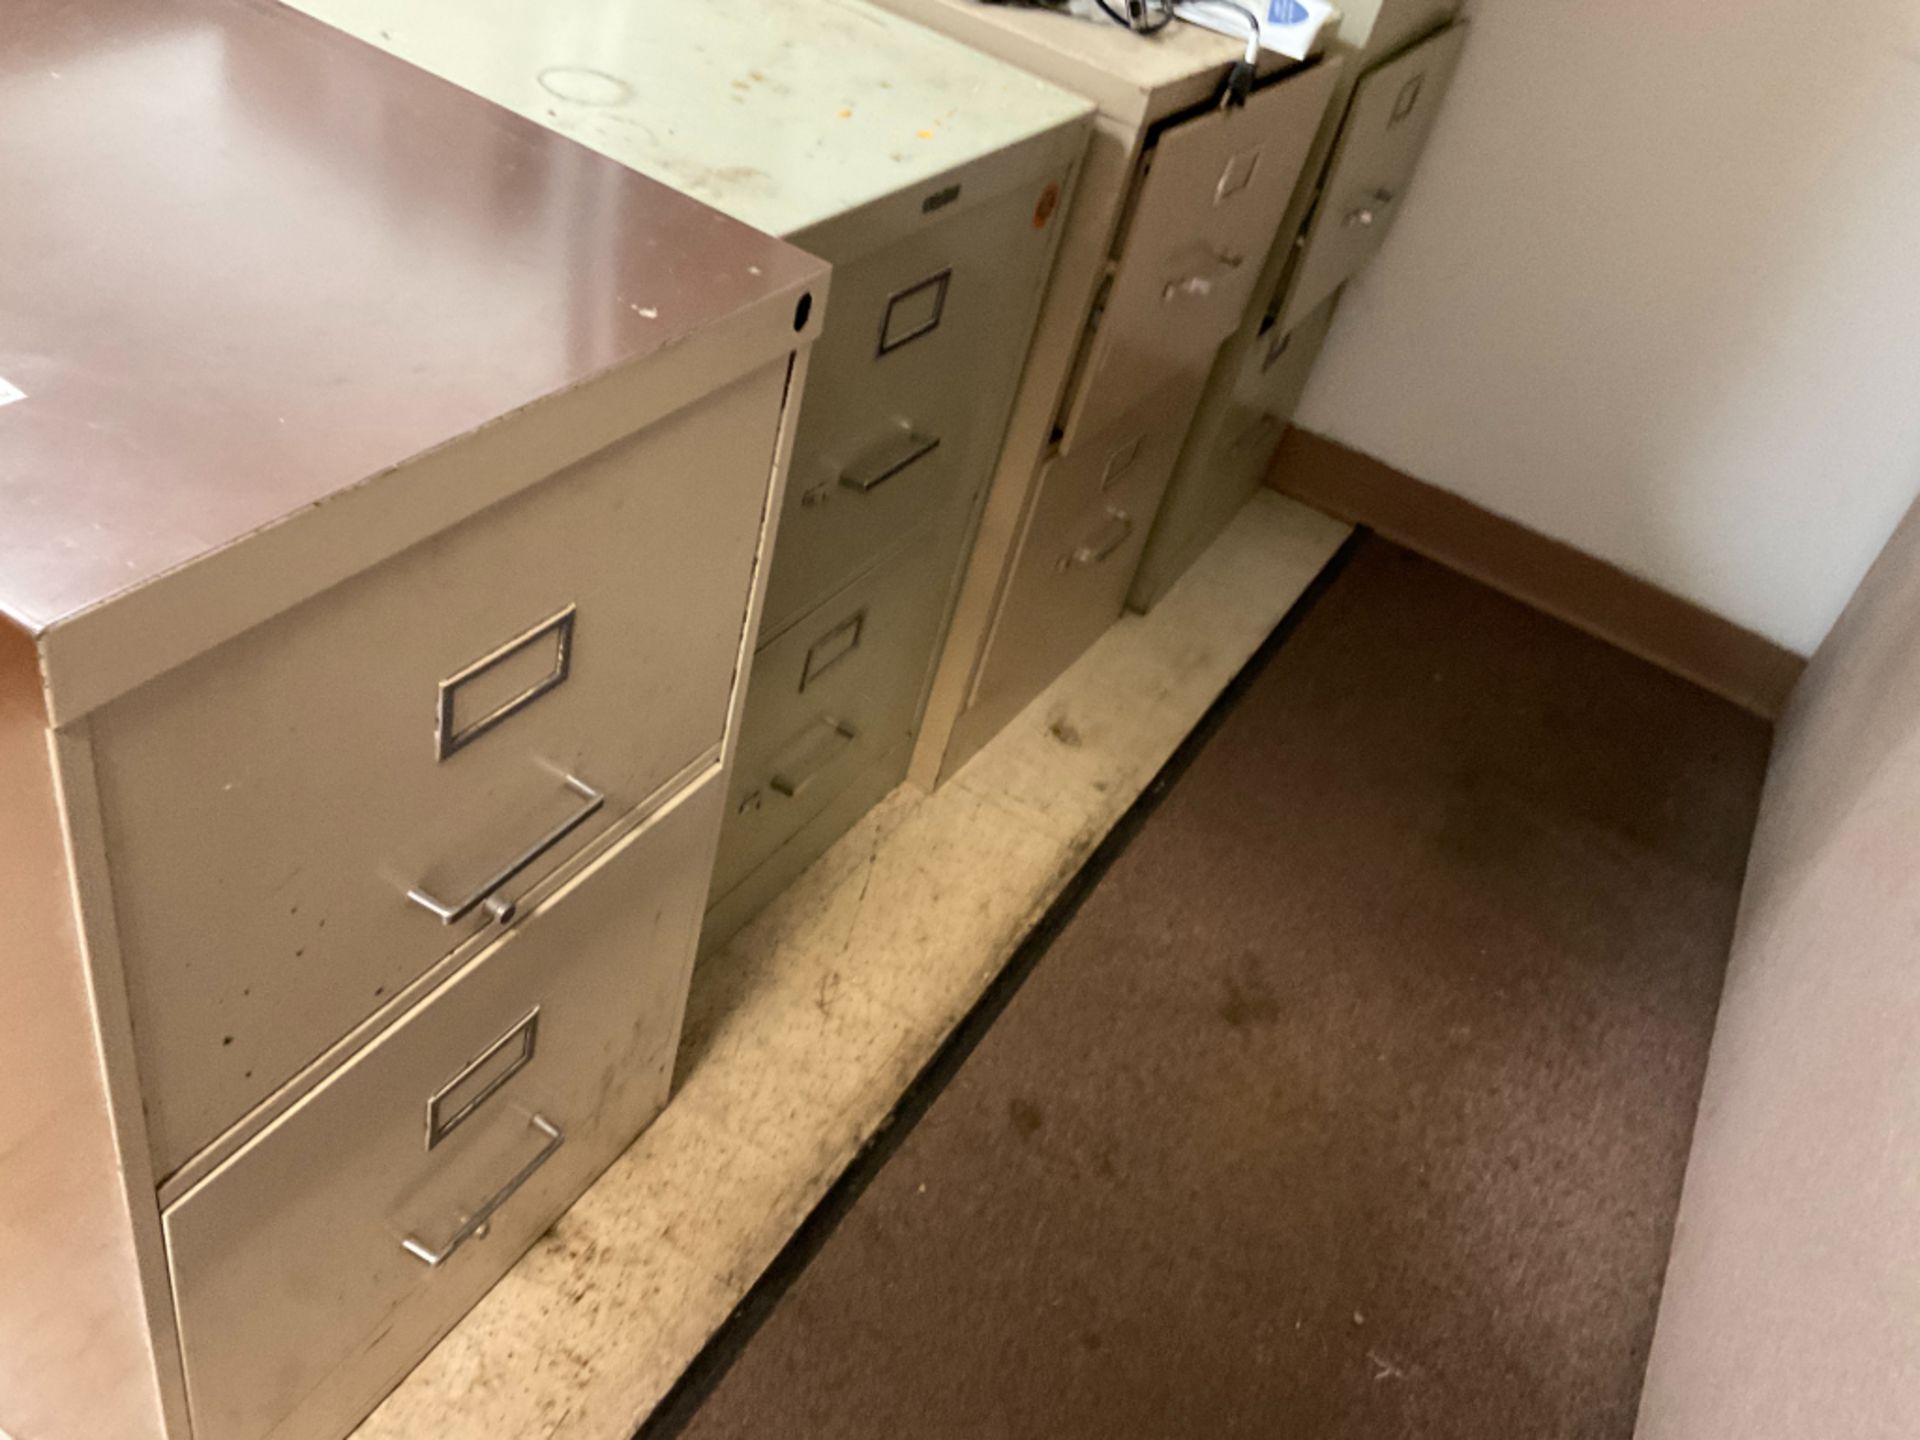 File Cabinets - Image 2 of 3